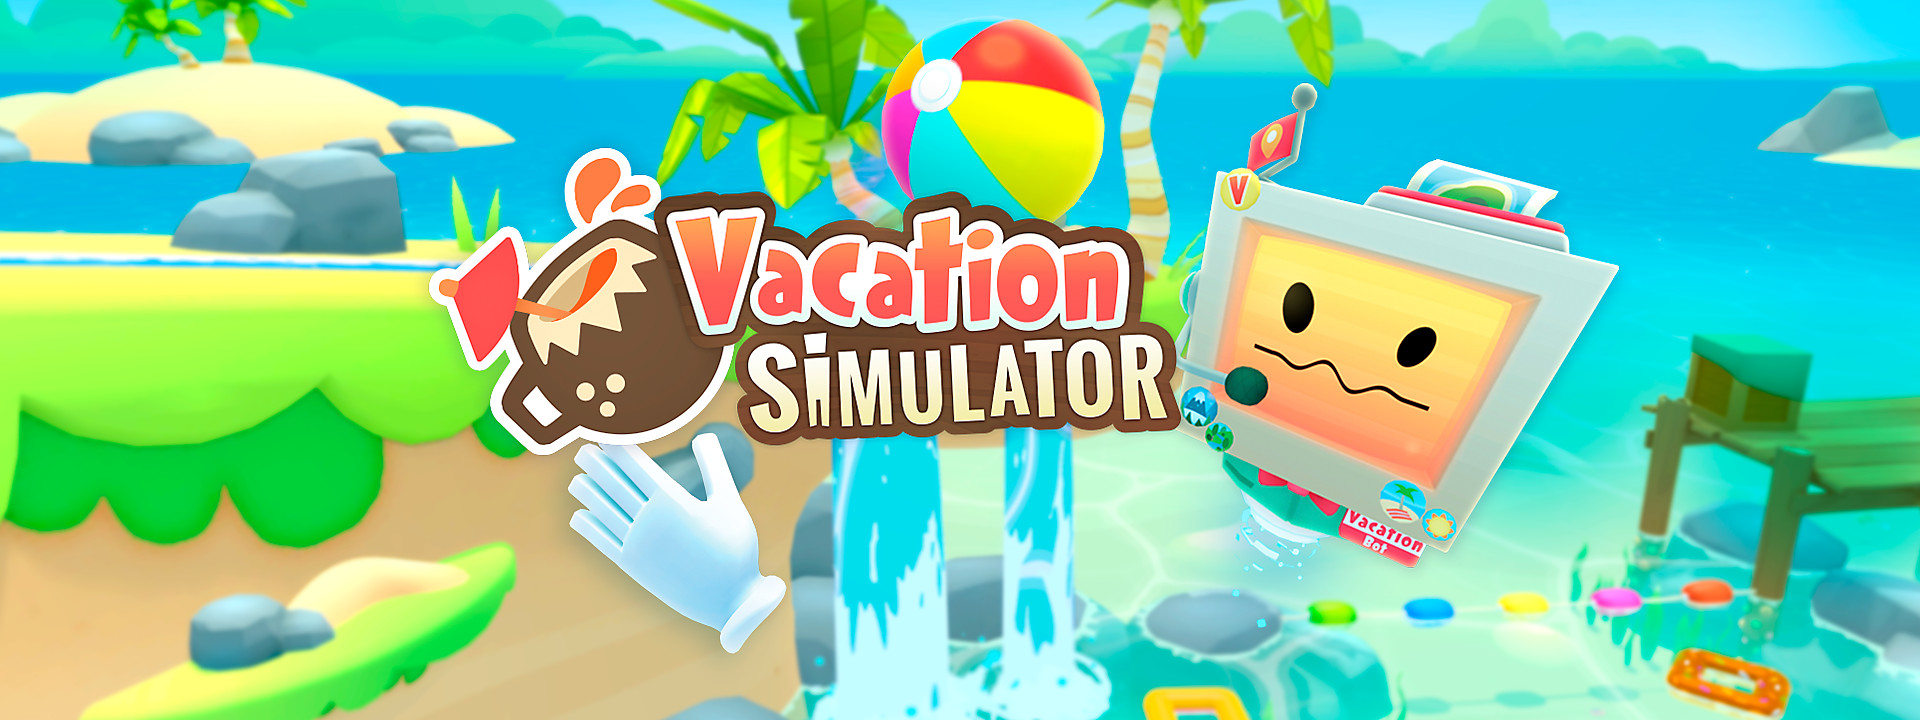 Vacation Simulator Has Aquatic Worlds For PS VR, Lay Back And Take A Breather In This VR Experience